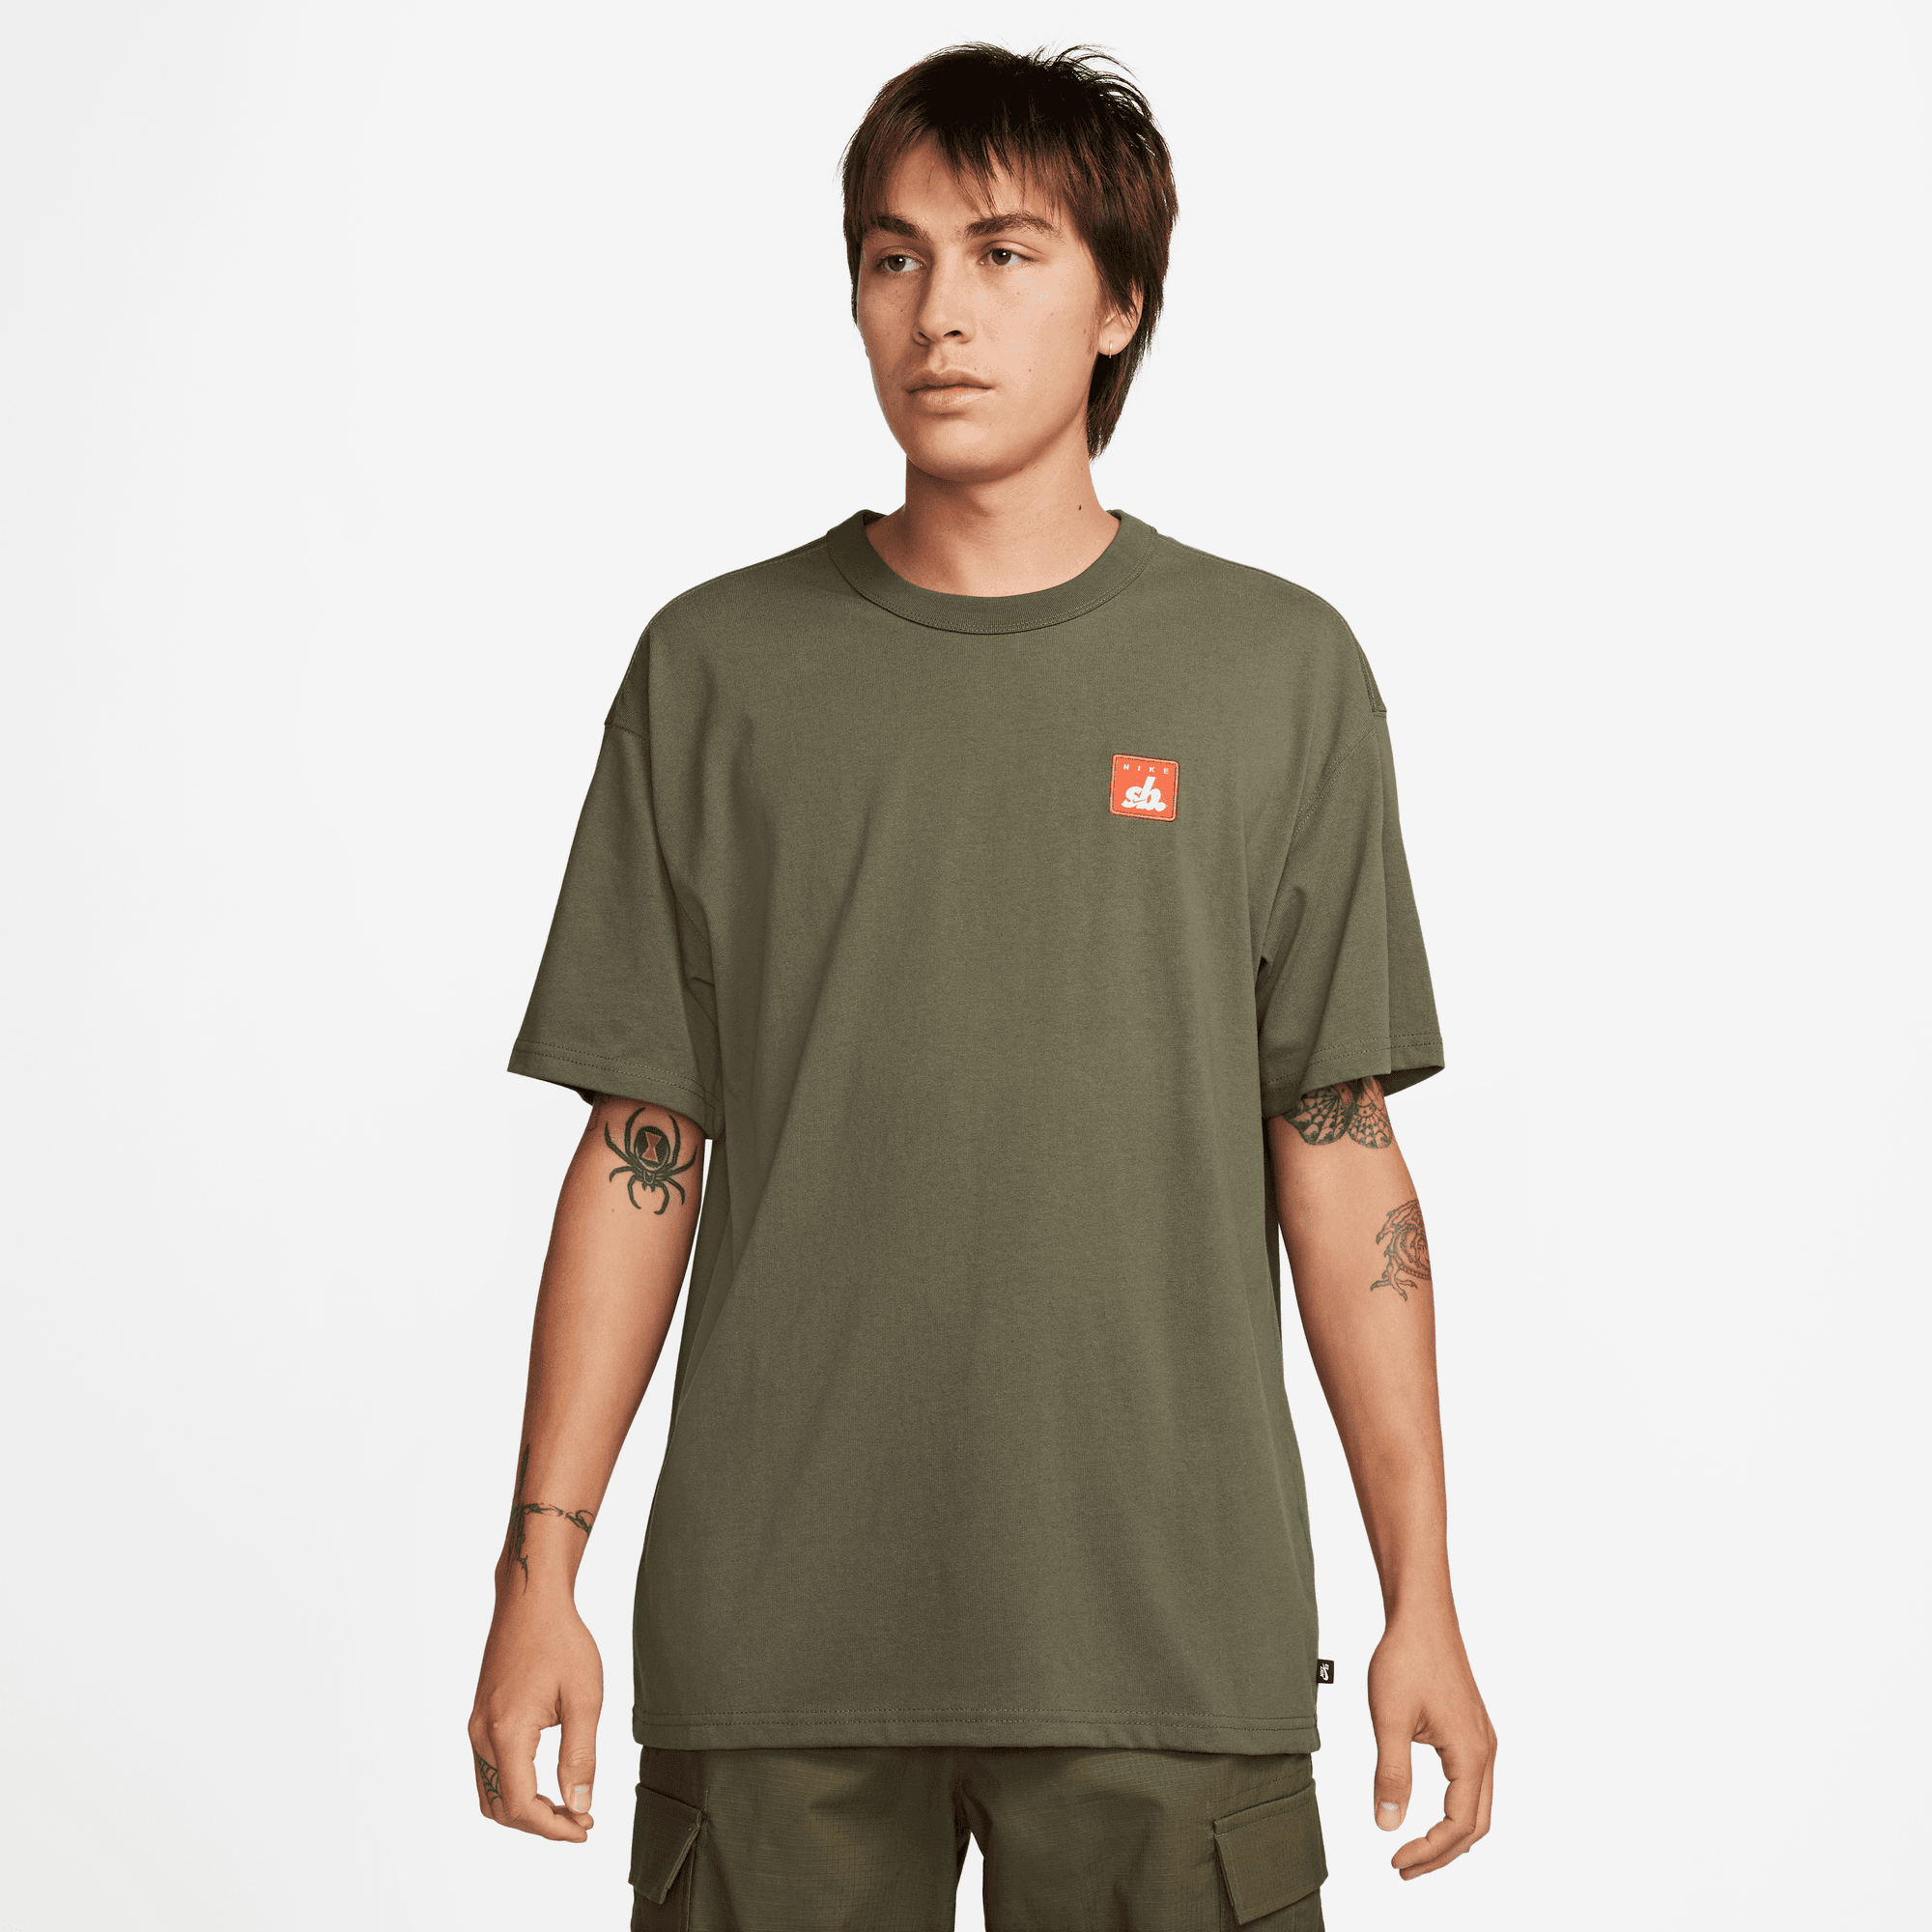 Medium Olive Embroireded Patch Nike Sb T-Shirt